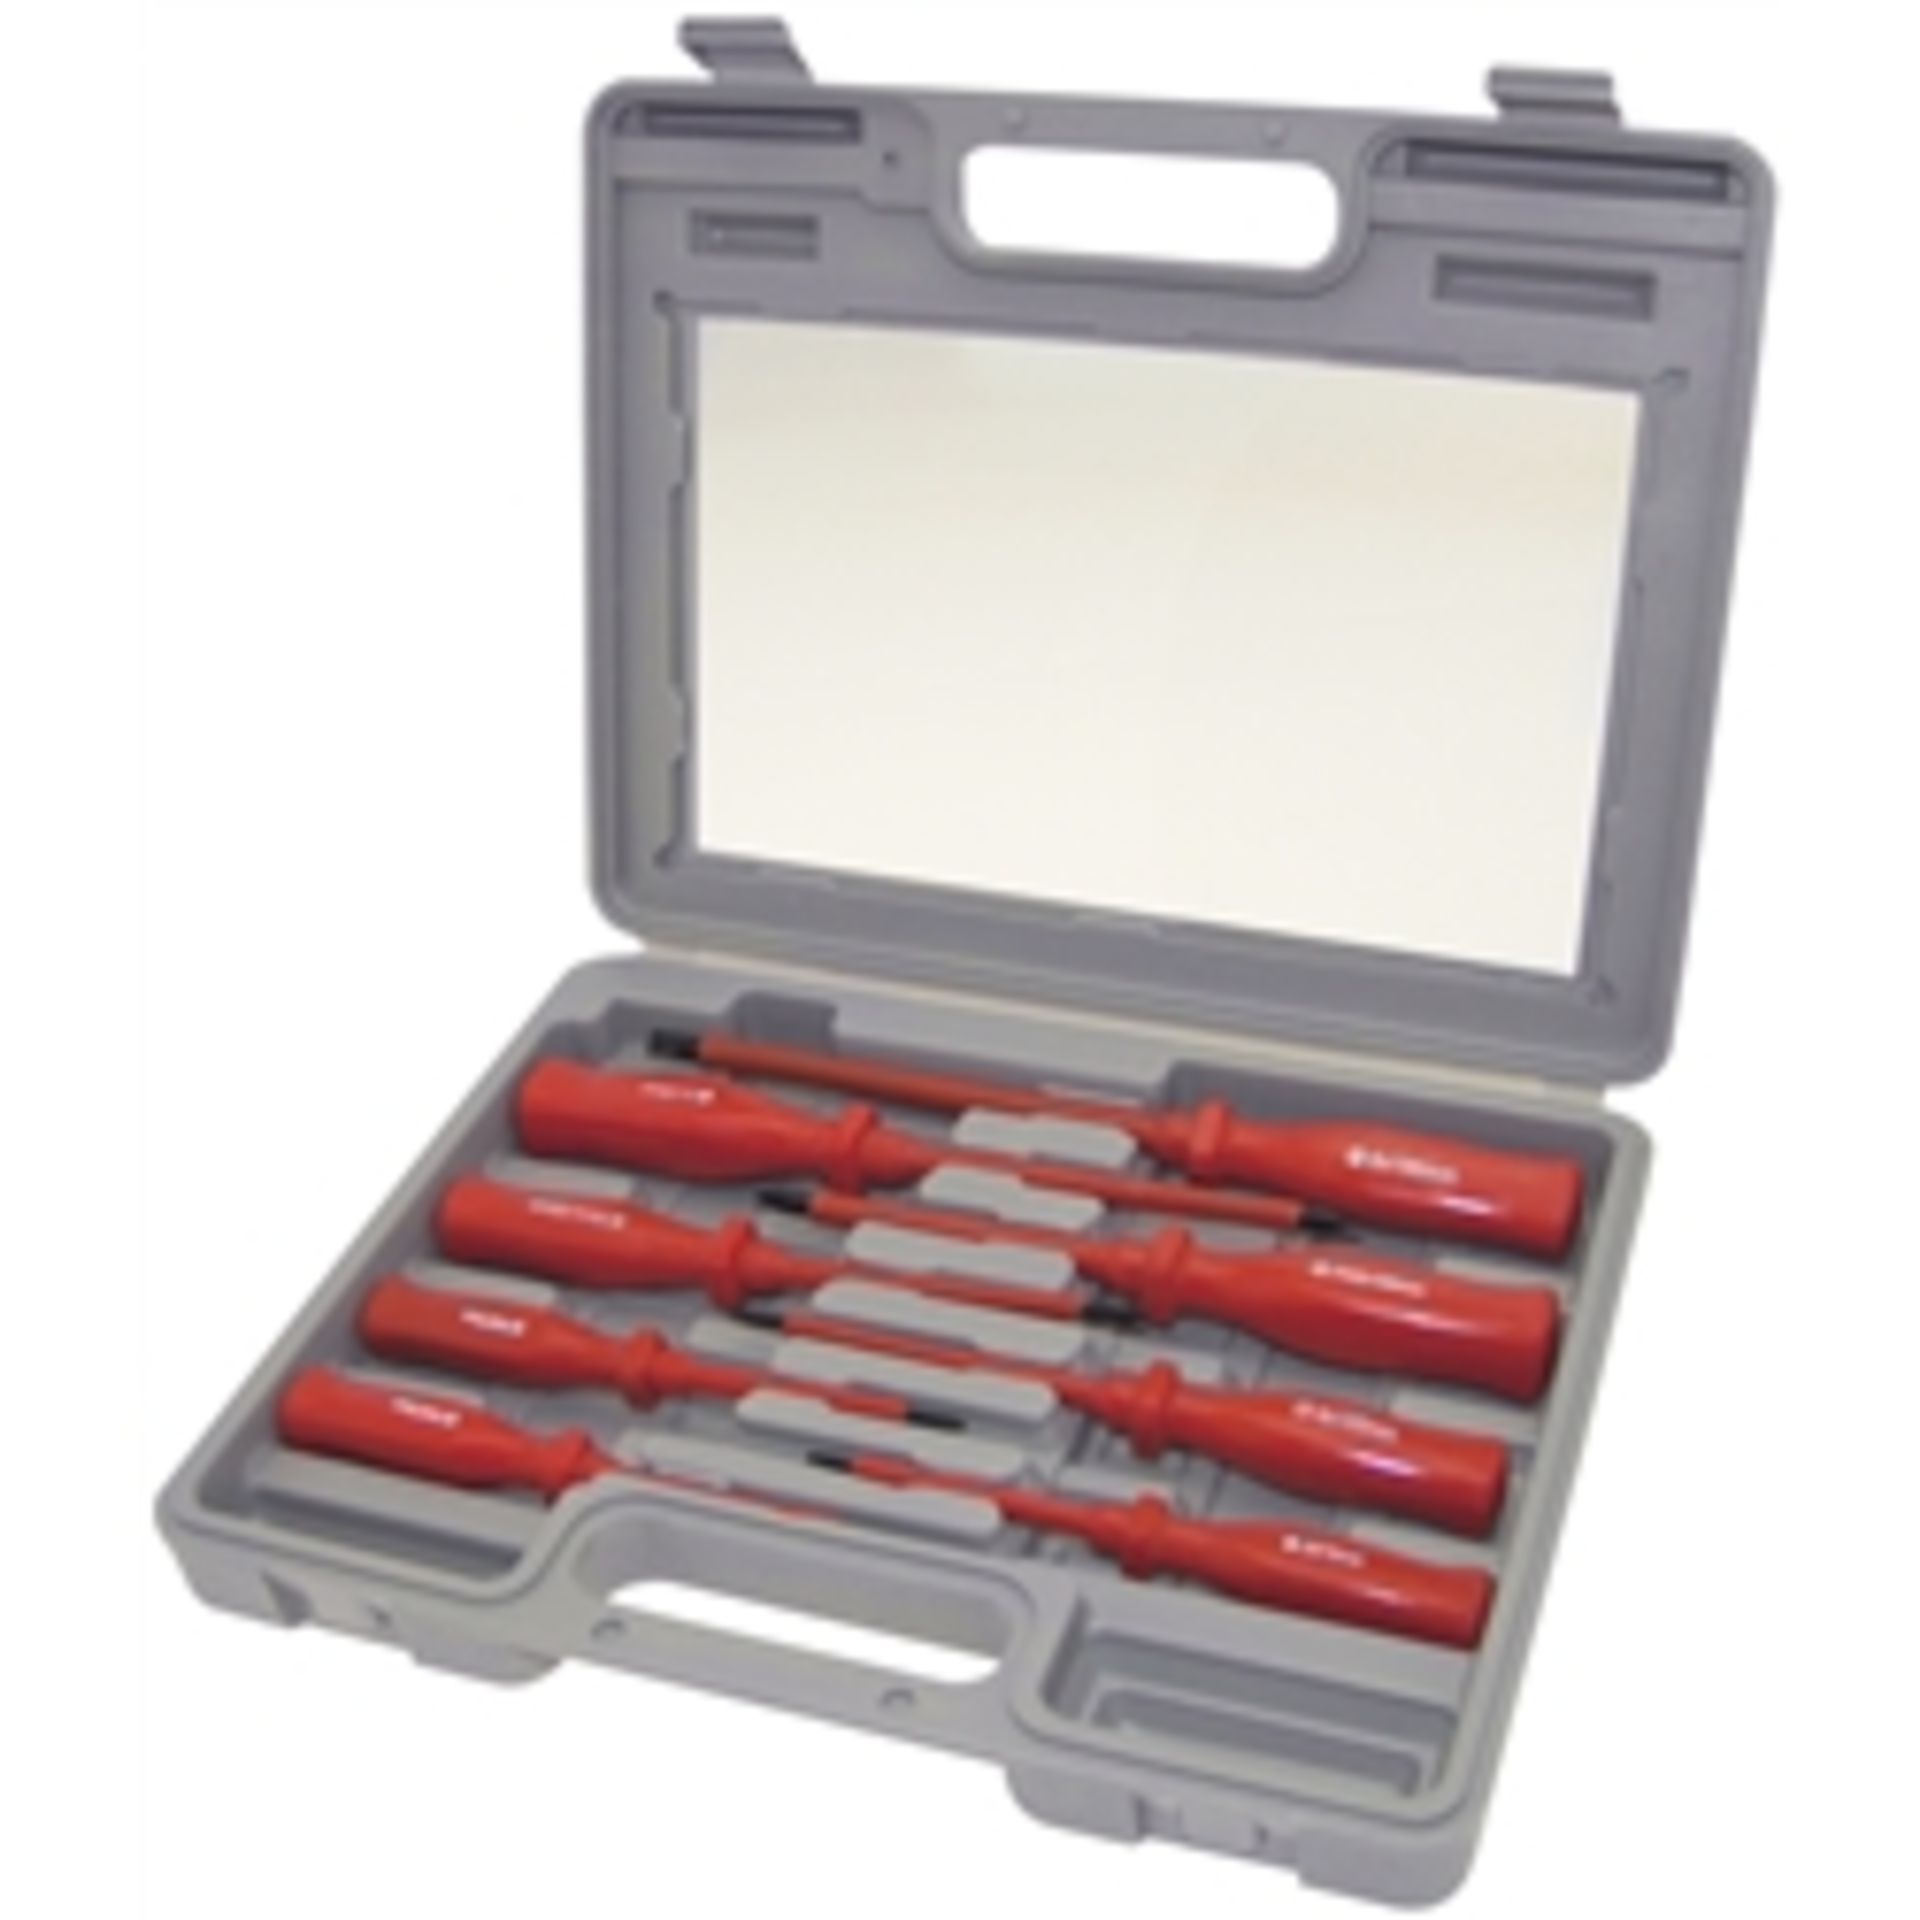 V Brand New Eight Piece Screwdriver Set In Carry ase - Image 2 of 2